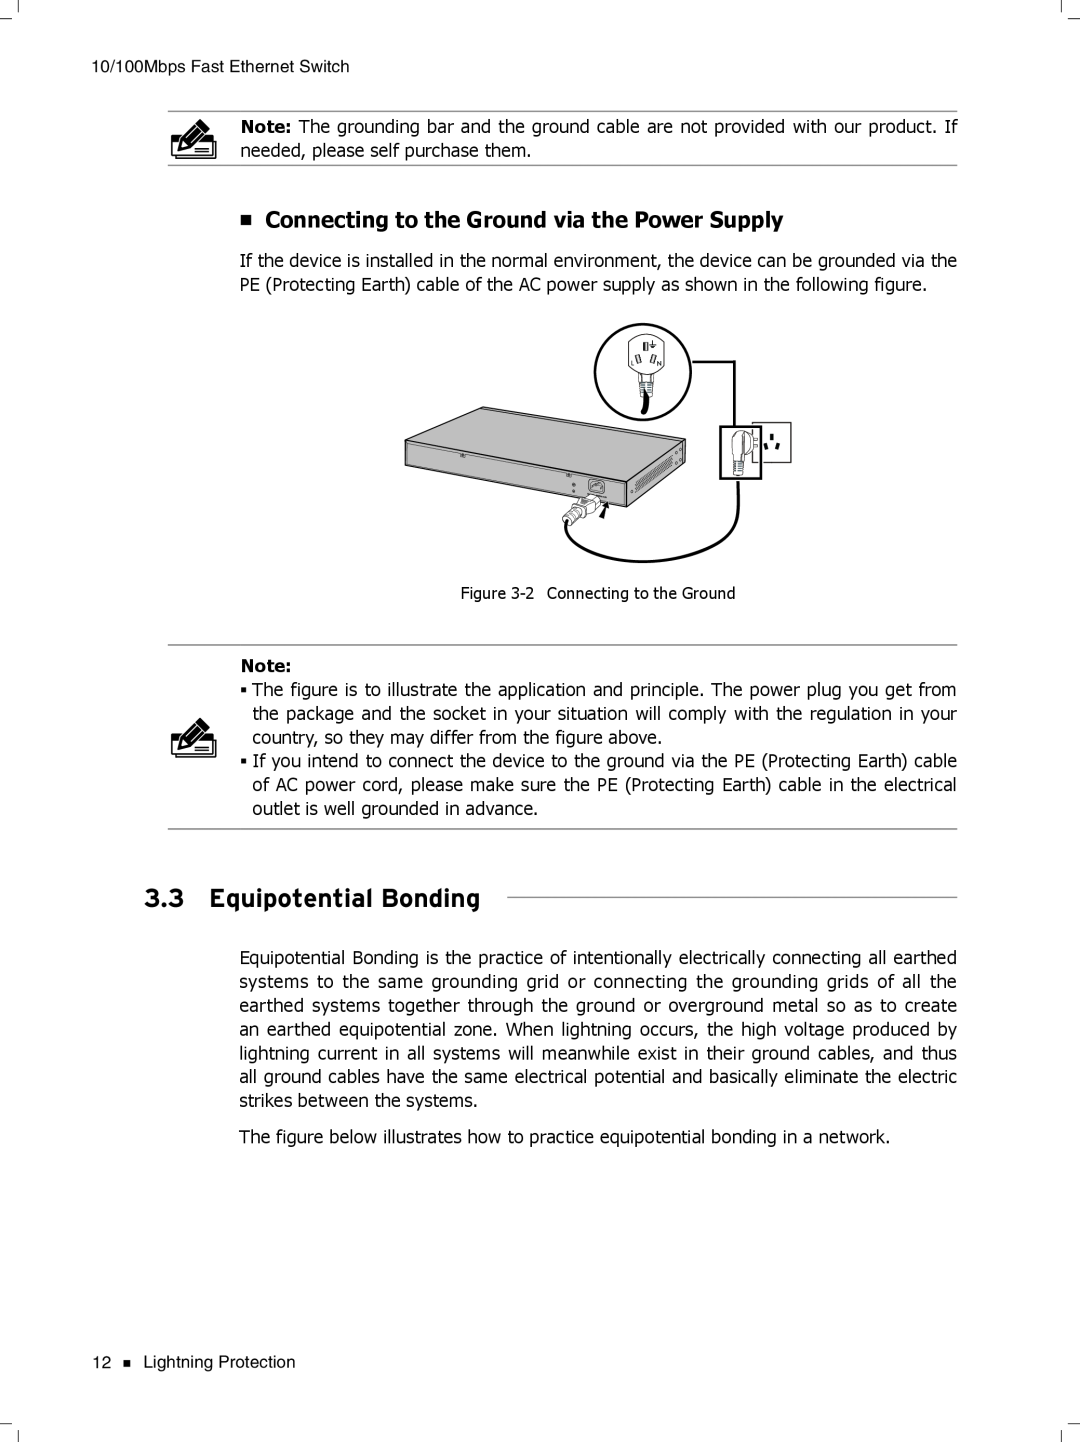 TP-Link TL-SF1024D, TL-SF1048, TL-SF1016DS manual Equipotential Bonding, Connecting to the Ground via the Power Supply 